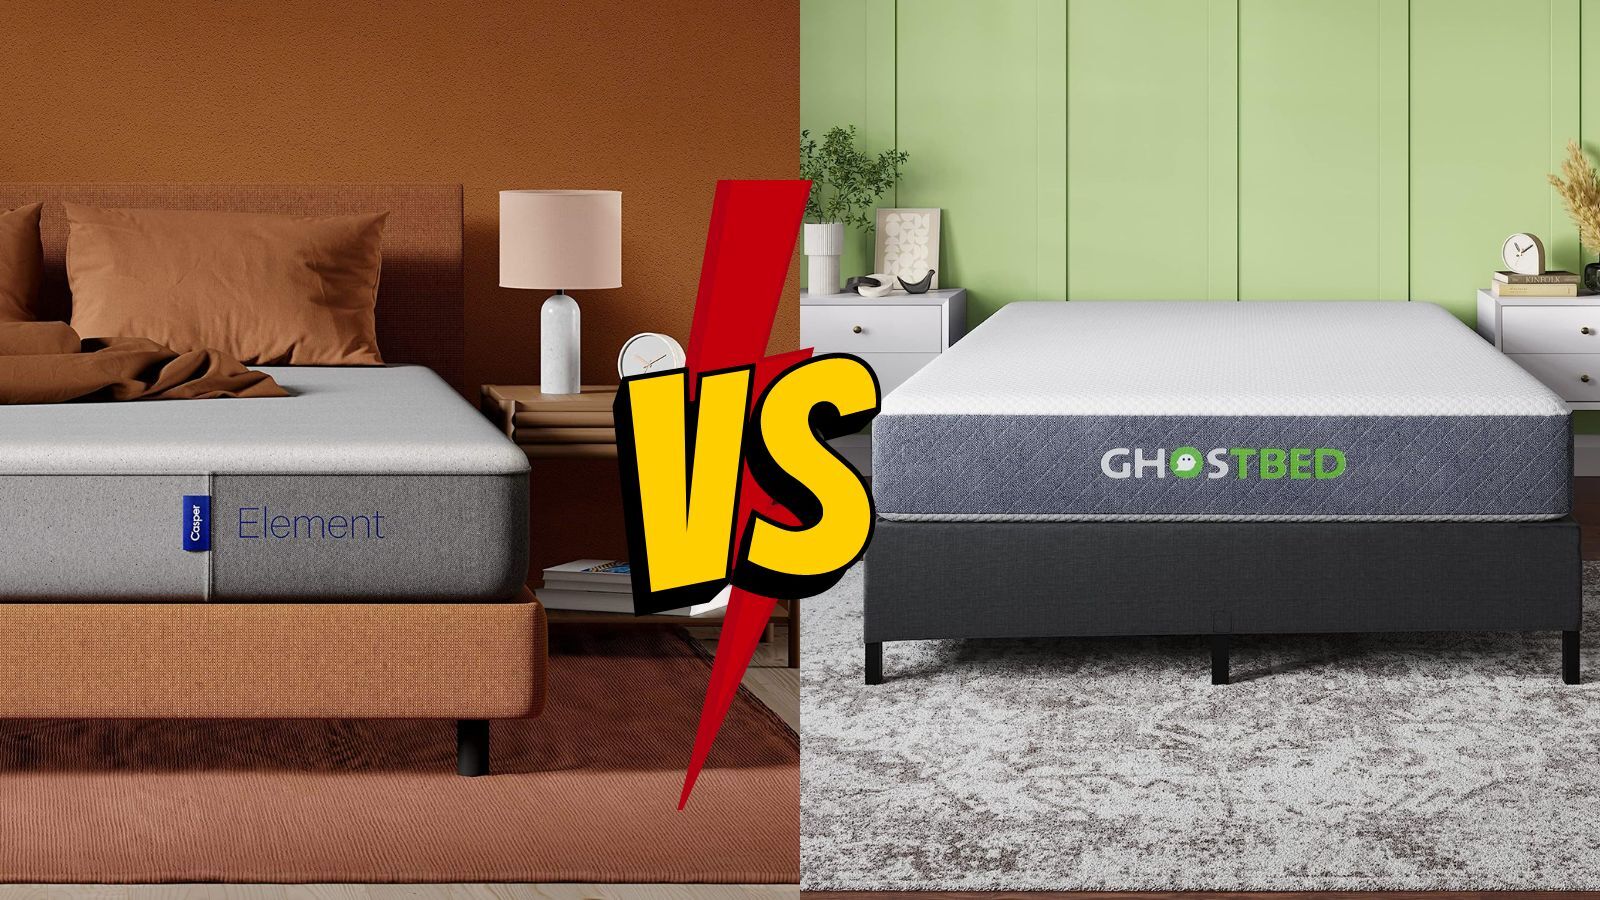 Casper VS Ghostbed: Which One To Buy And Why?